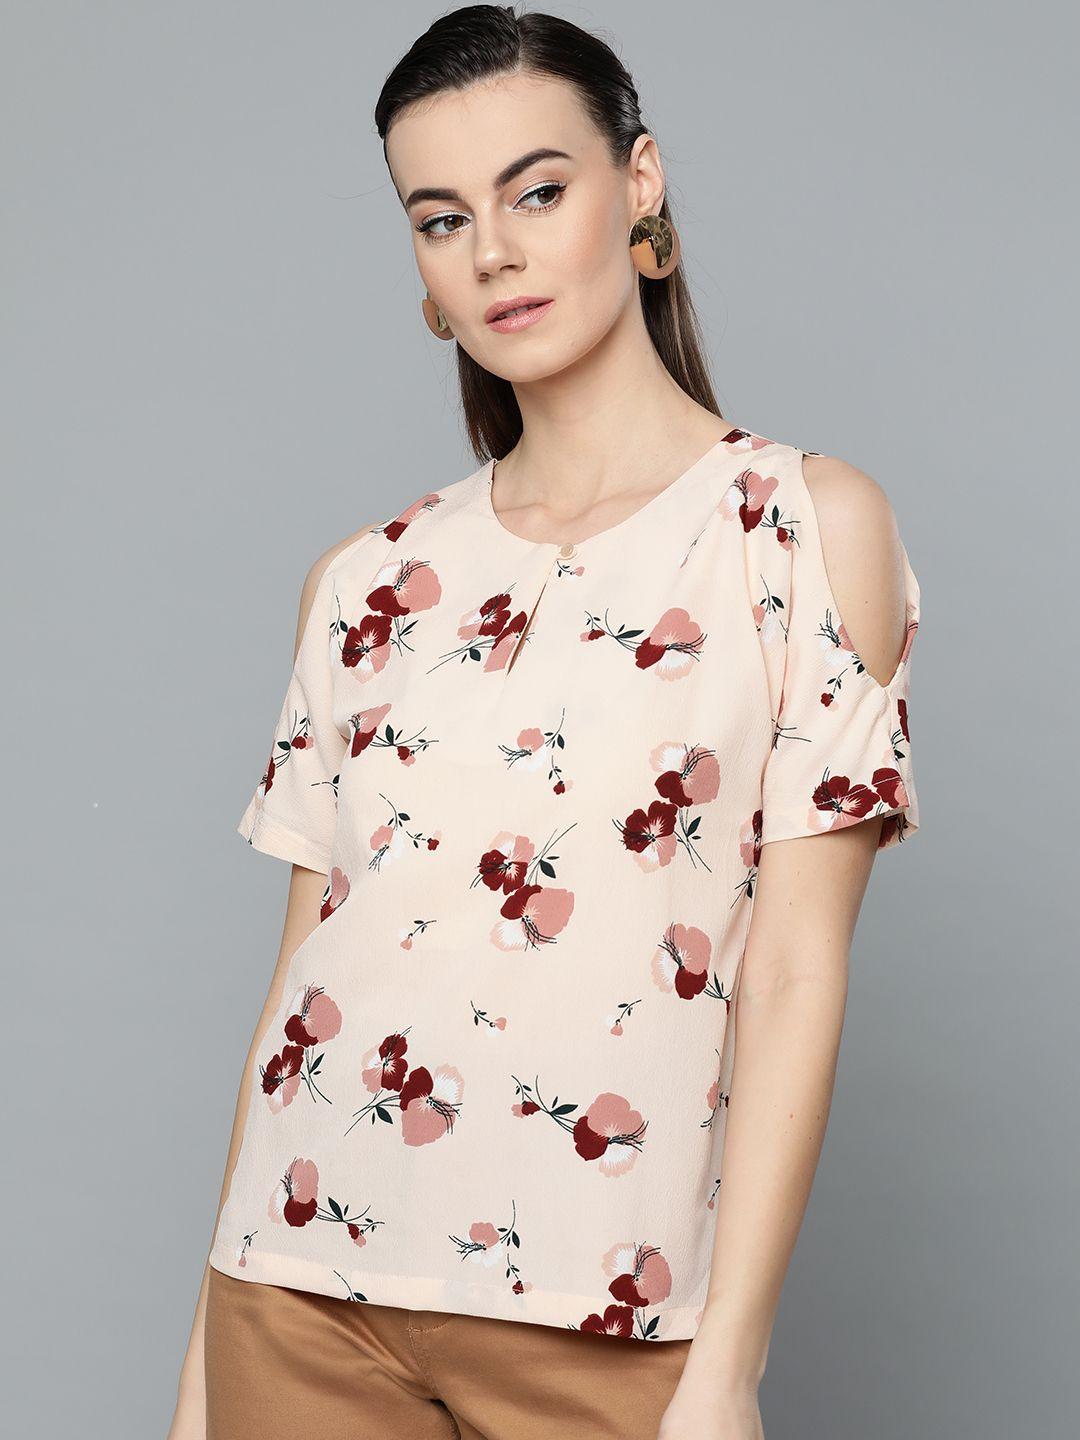 marie claire women peach-coloured & maroon cold-shoulder printed top